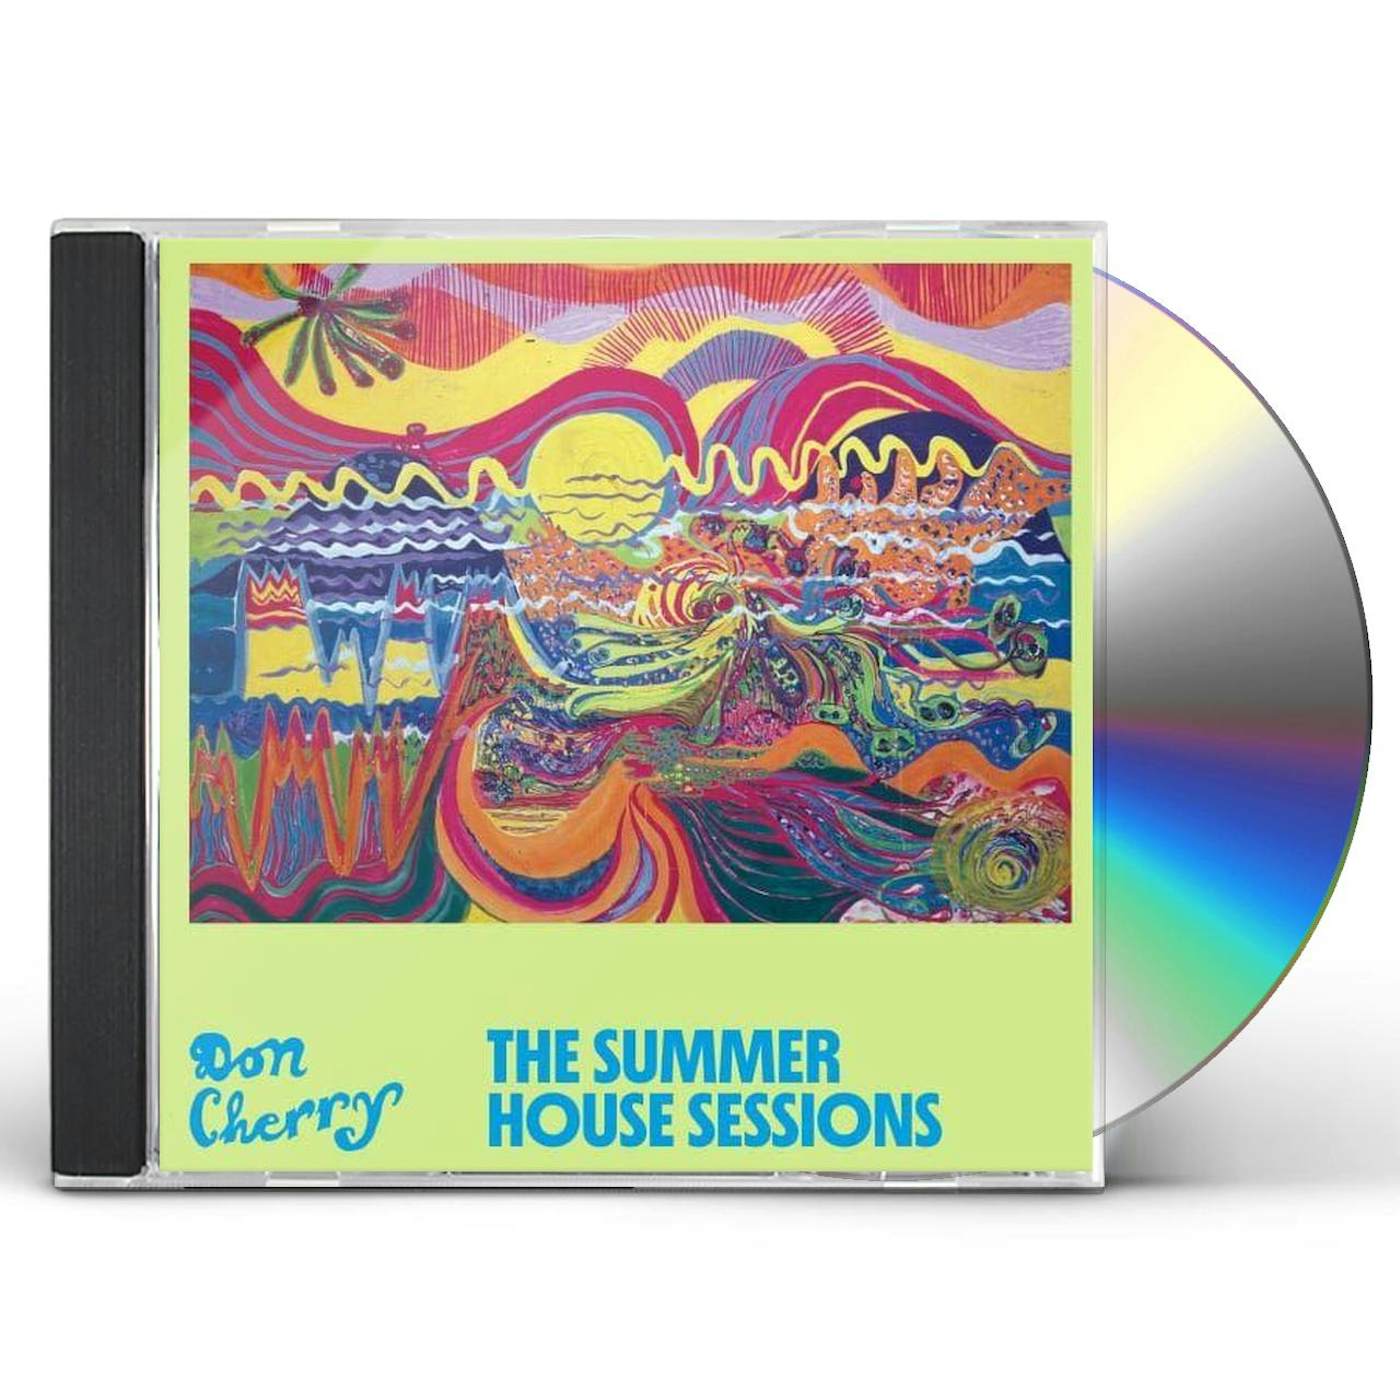 Don Cherry SUMMER HOUSE SESSIONS CD